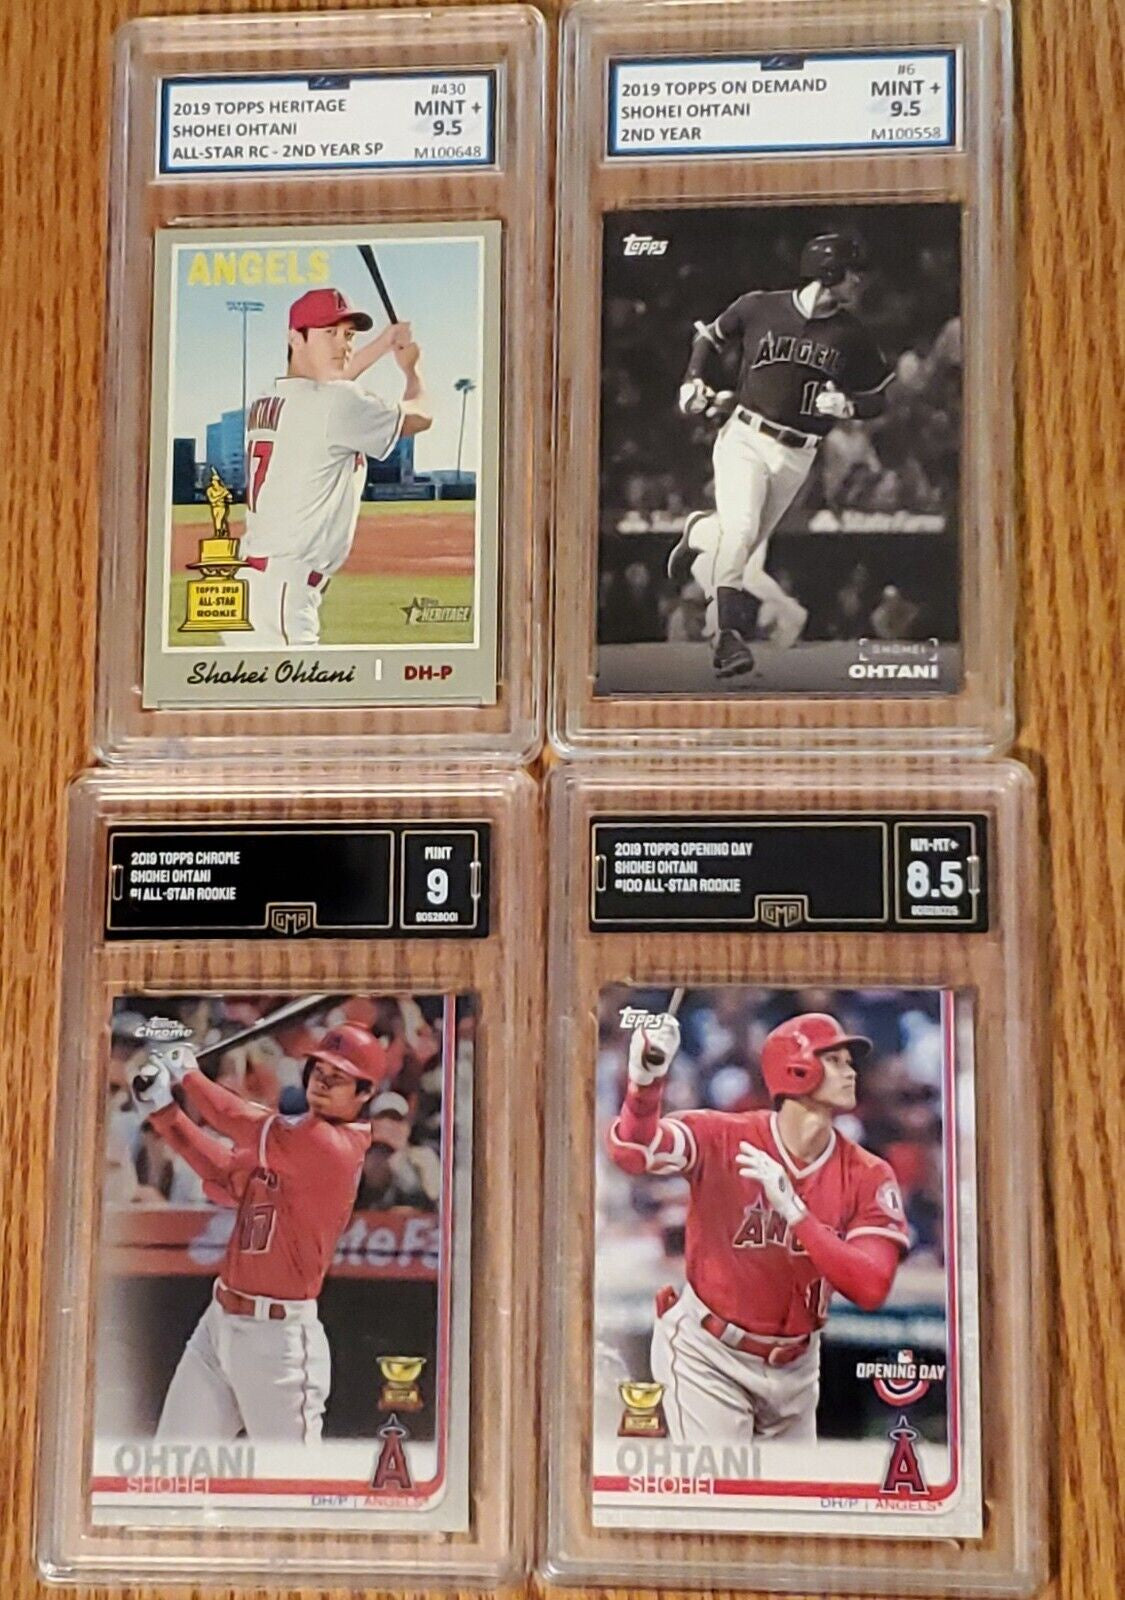 Shohei Ohtani - Topps MLB Baseball Card REPACK - 1x Sports Card Single (Various Grading Companies, Graded 8.5 to 9, Randomly Selected, Stock Photo - Will Not Get Cards In Picture)